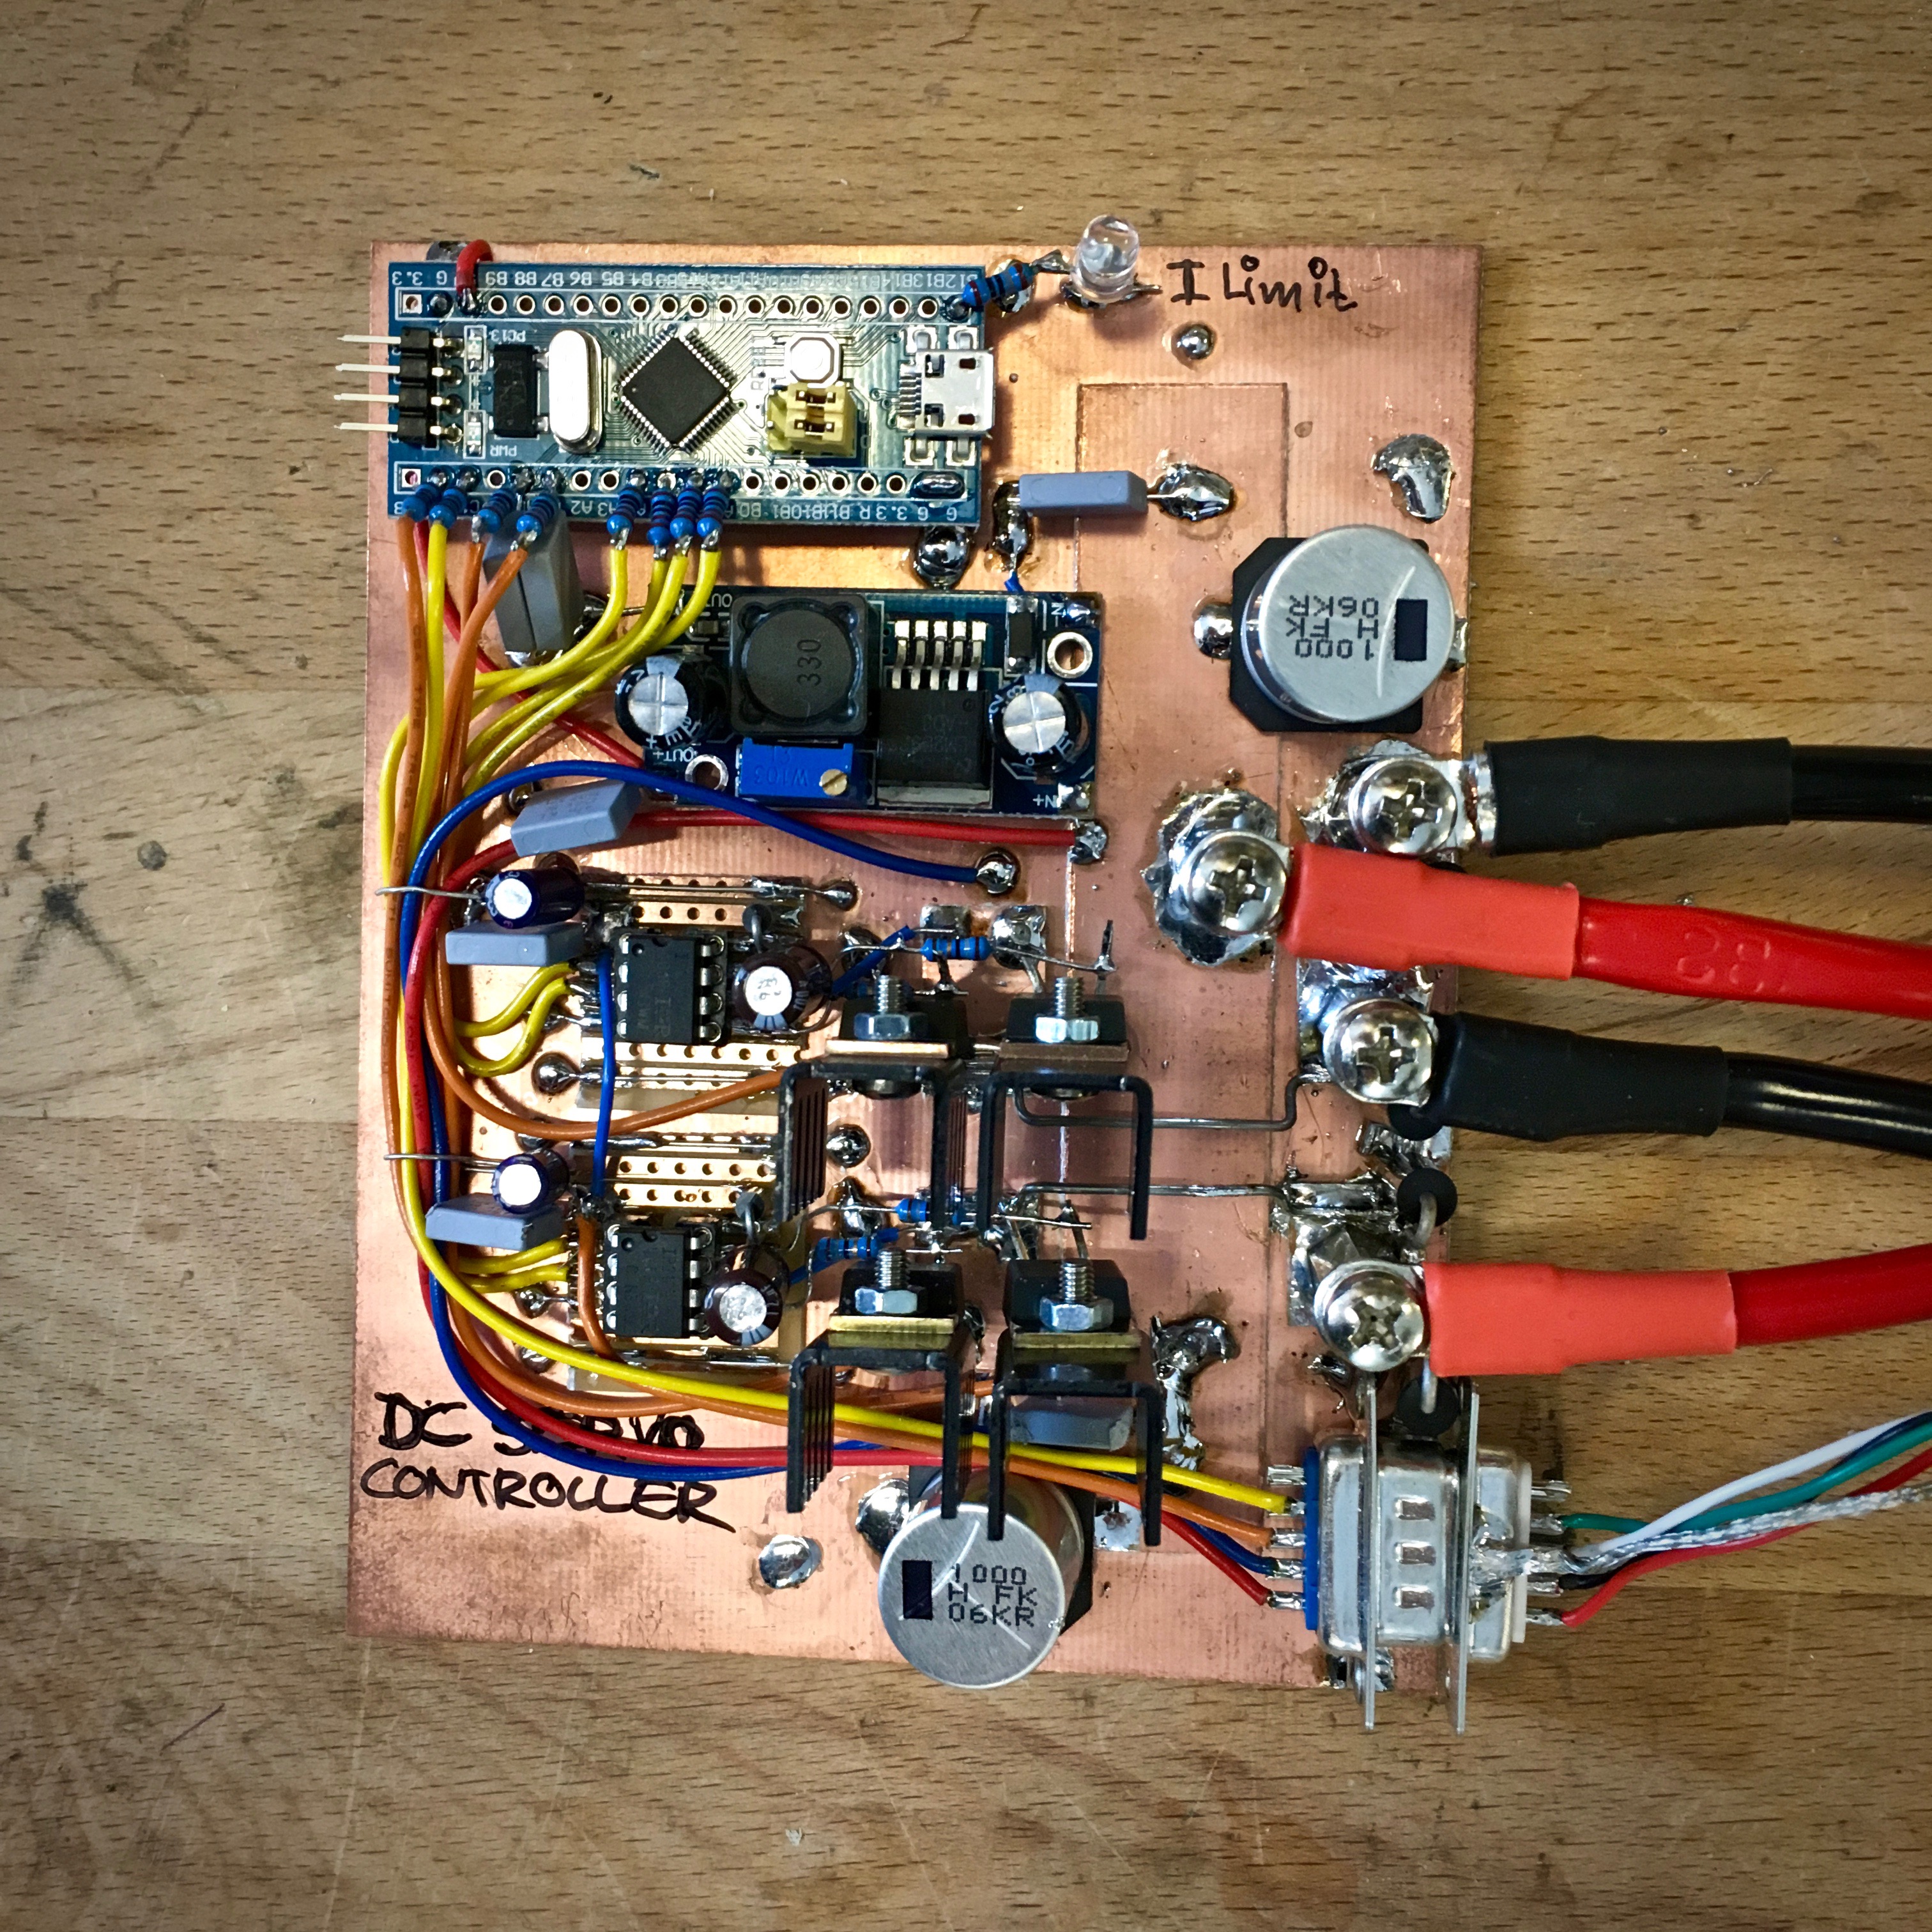 Prototype of the complete Controller